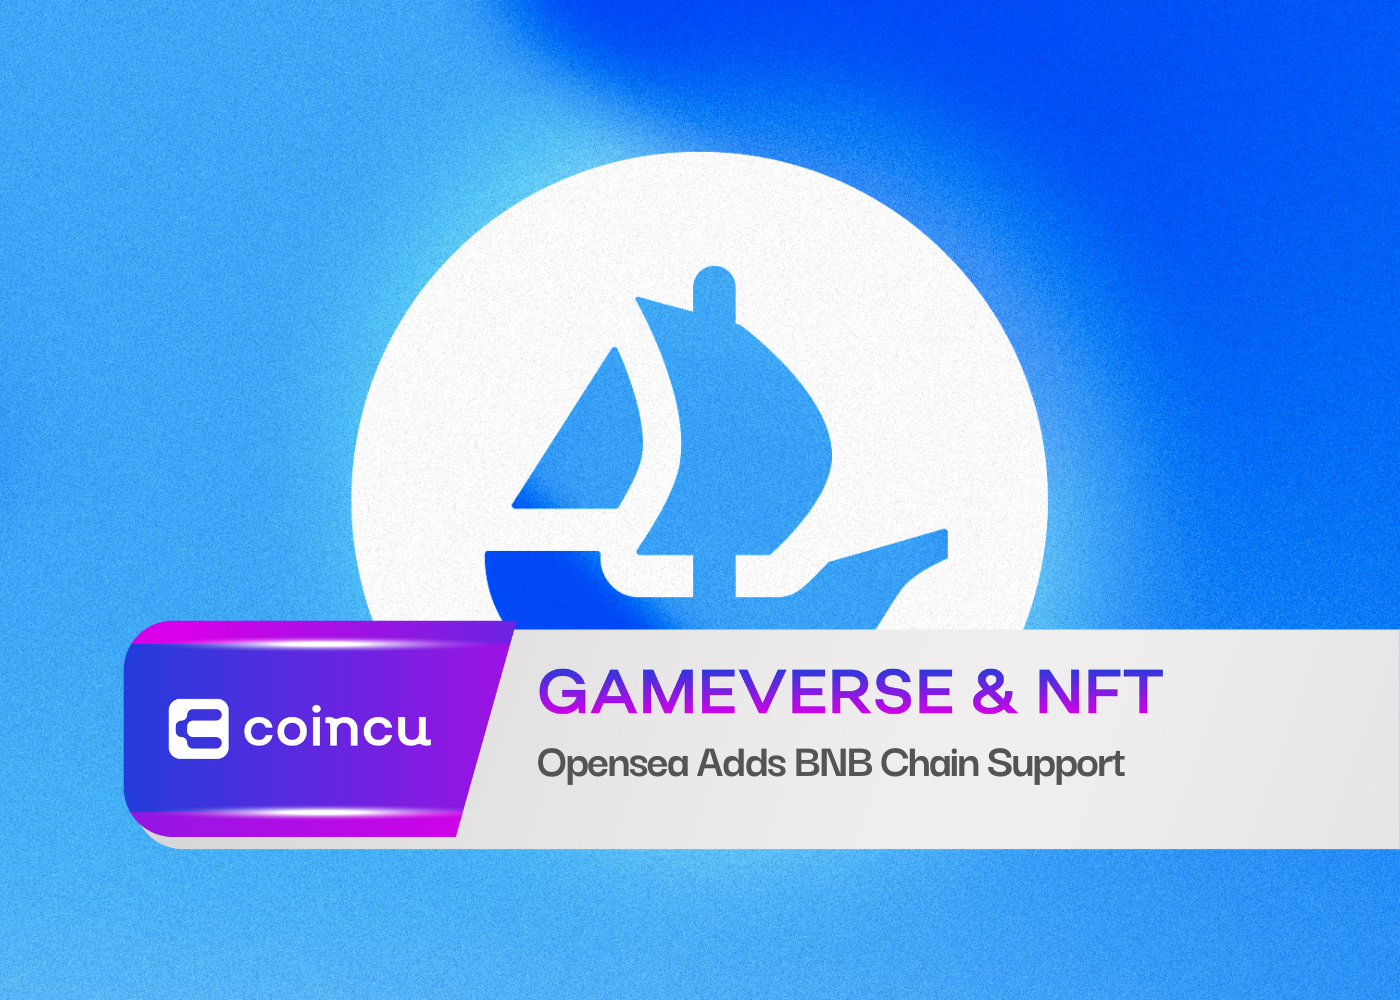 Opensea Adds BNB Chain Support